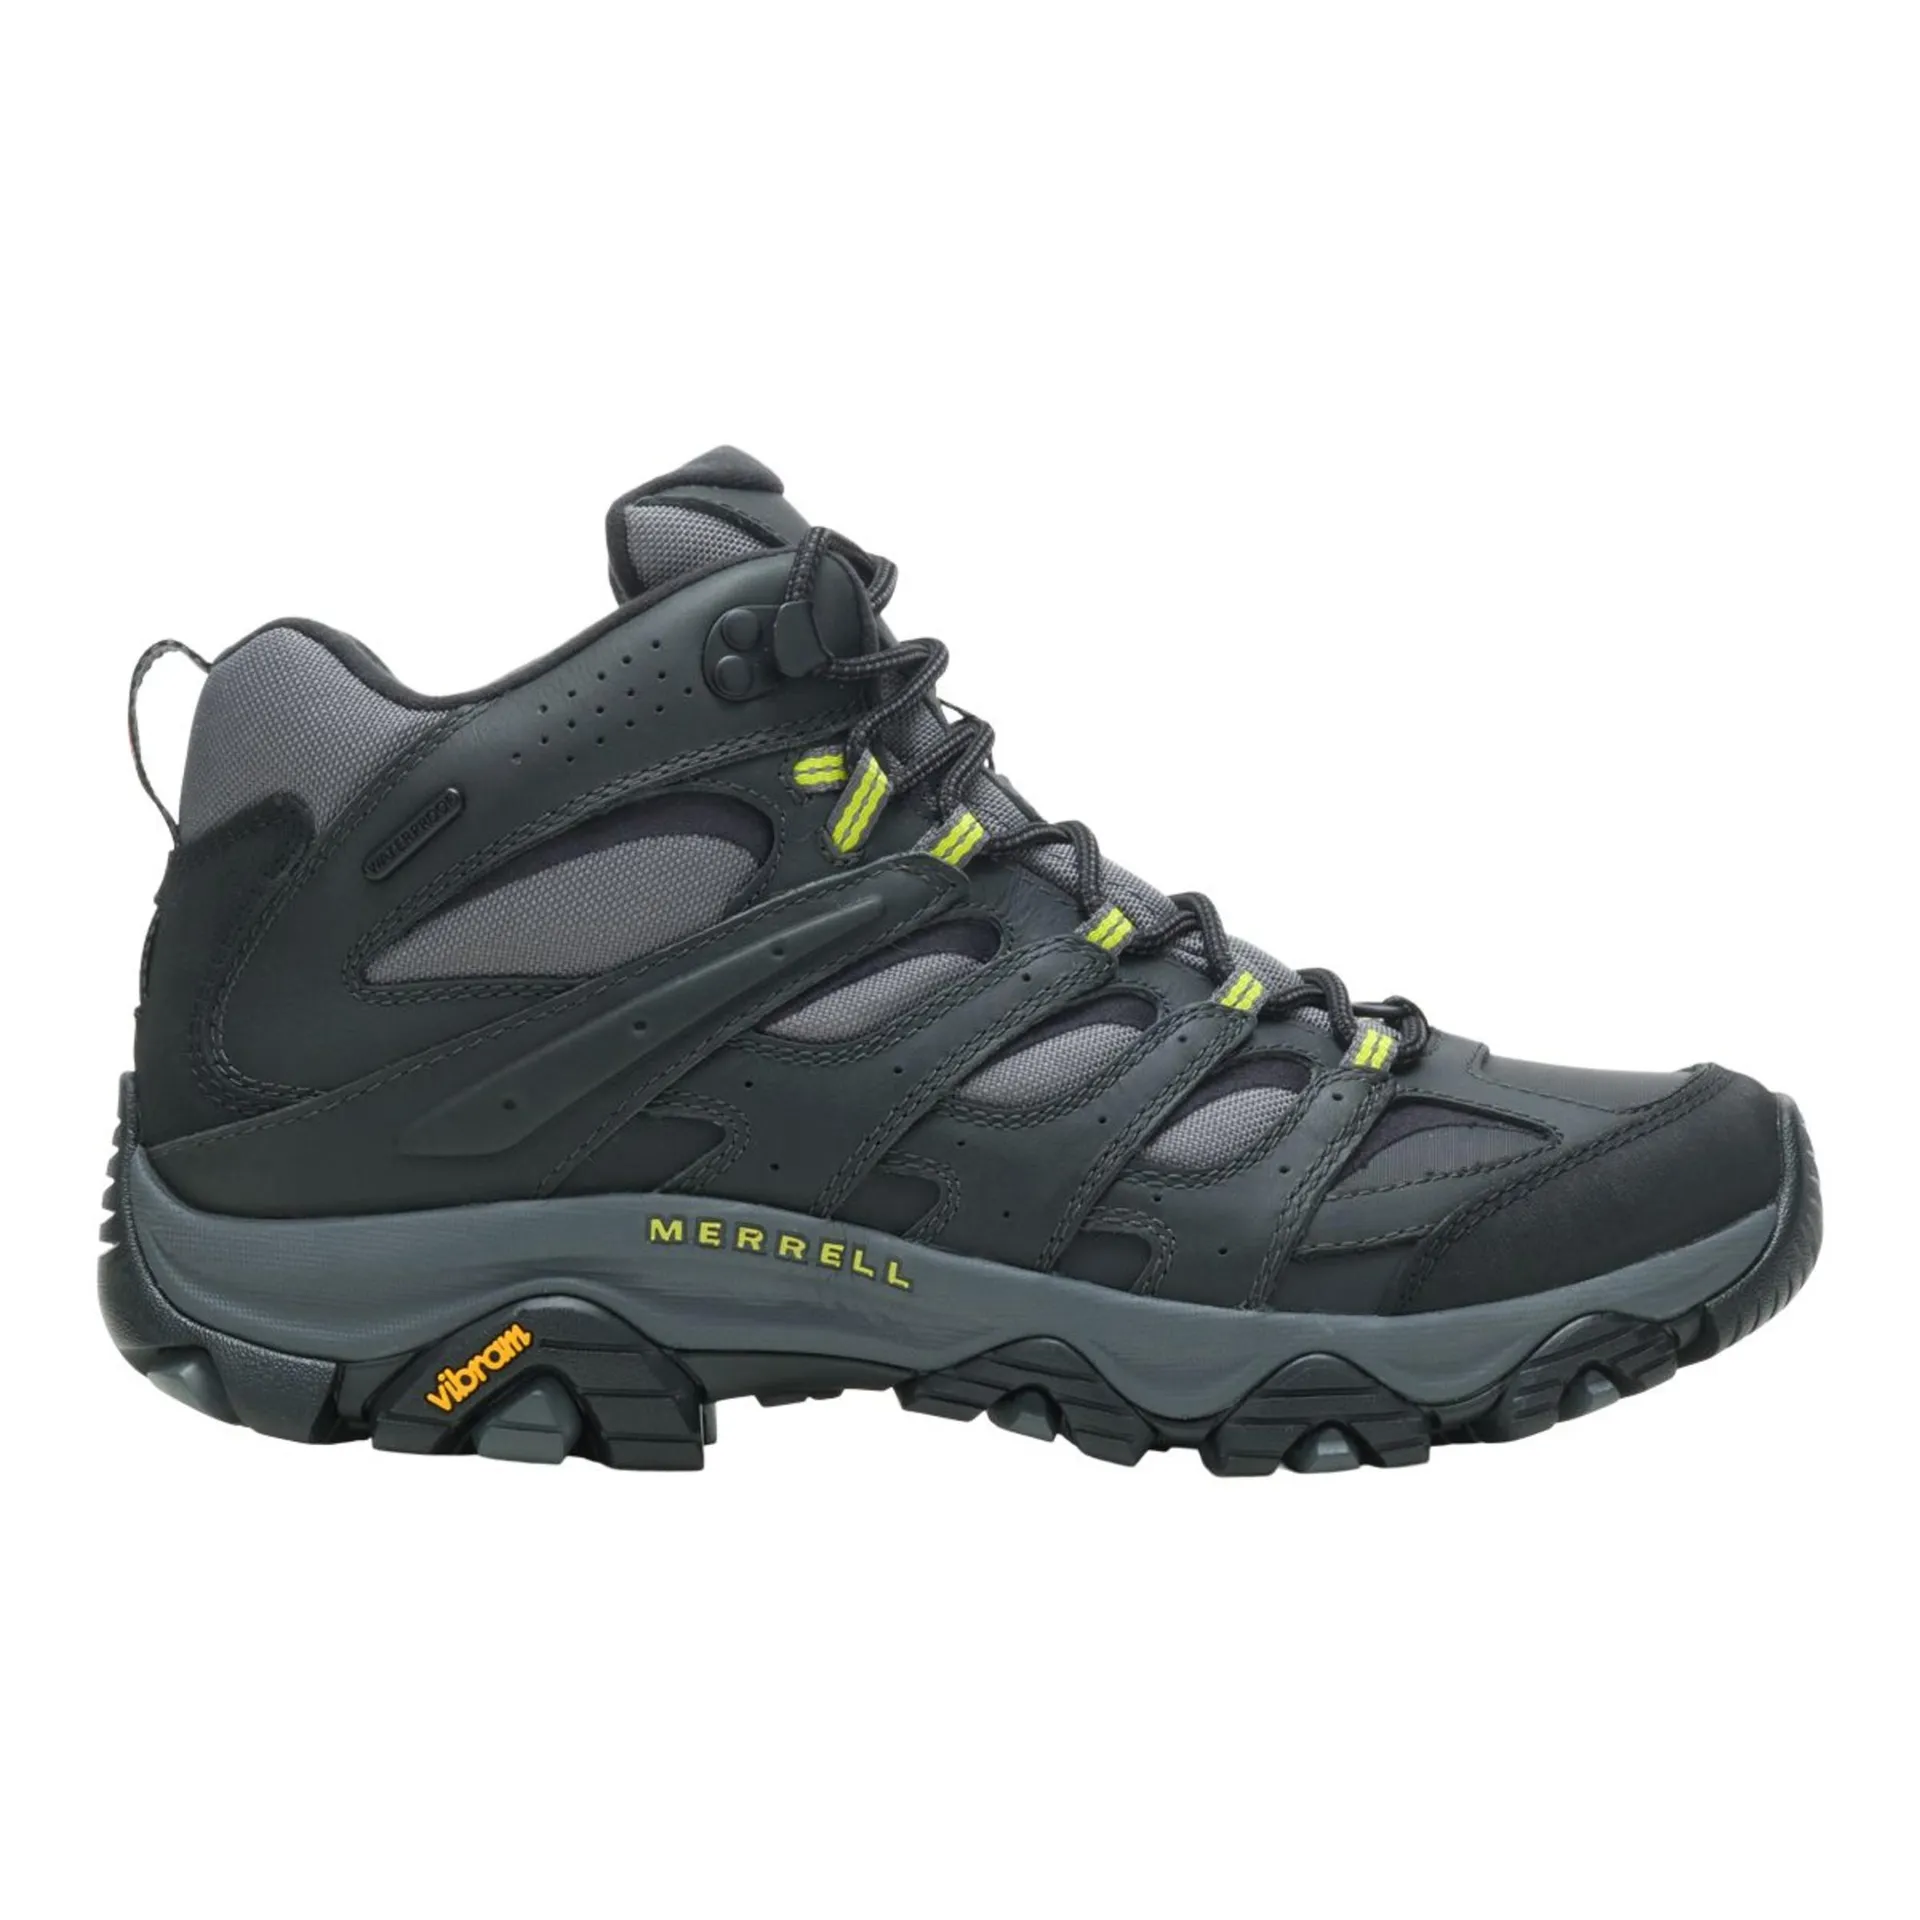 Merrell Men's Moab 3 Mid Breathable Waterproof Hiking Boots